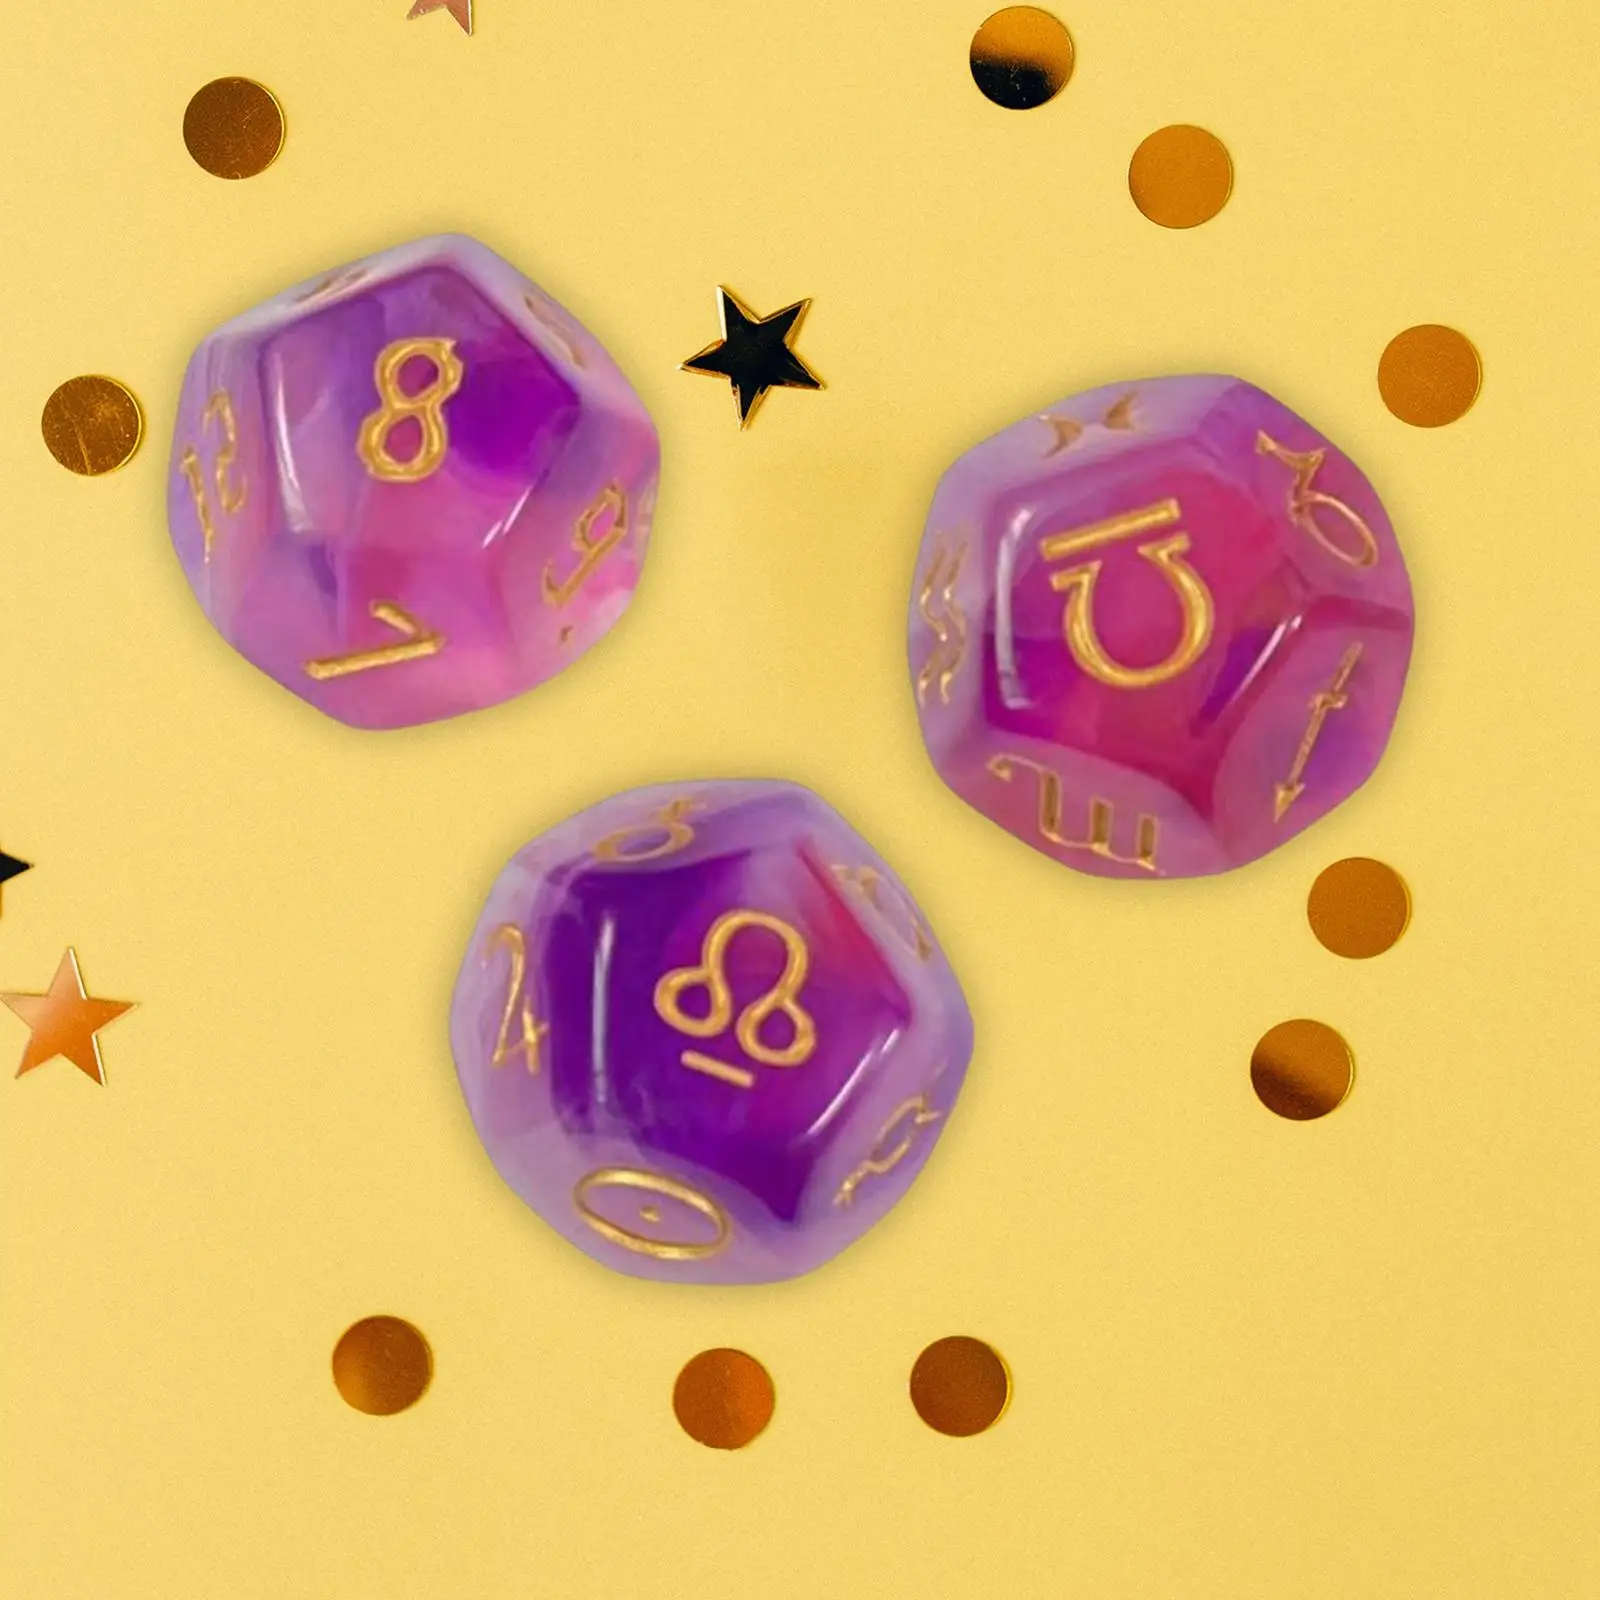 3 Pieces 12 Sided Astrology Dices Props Zodiac Astrology Planets Dice Set for Role Playing Board Games Dice Games Party Games